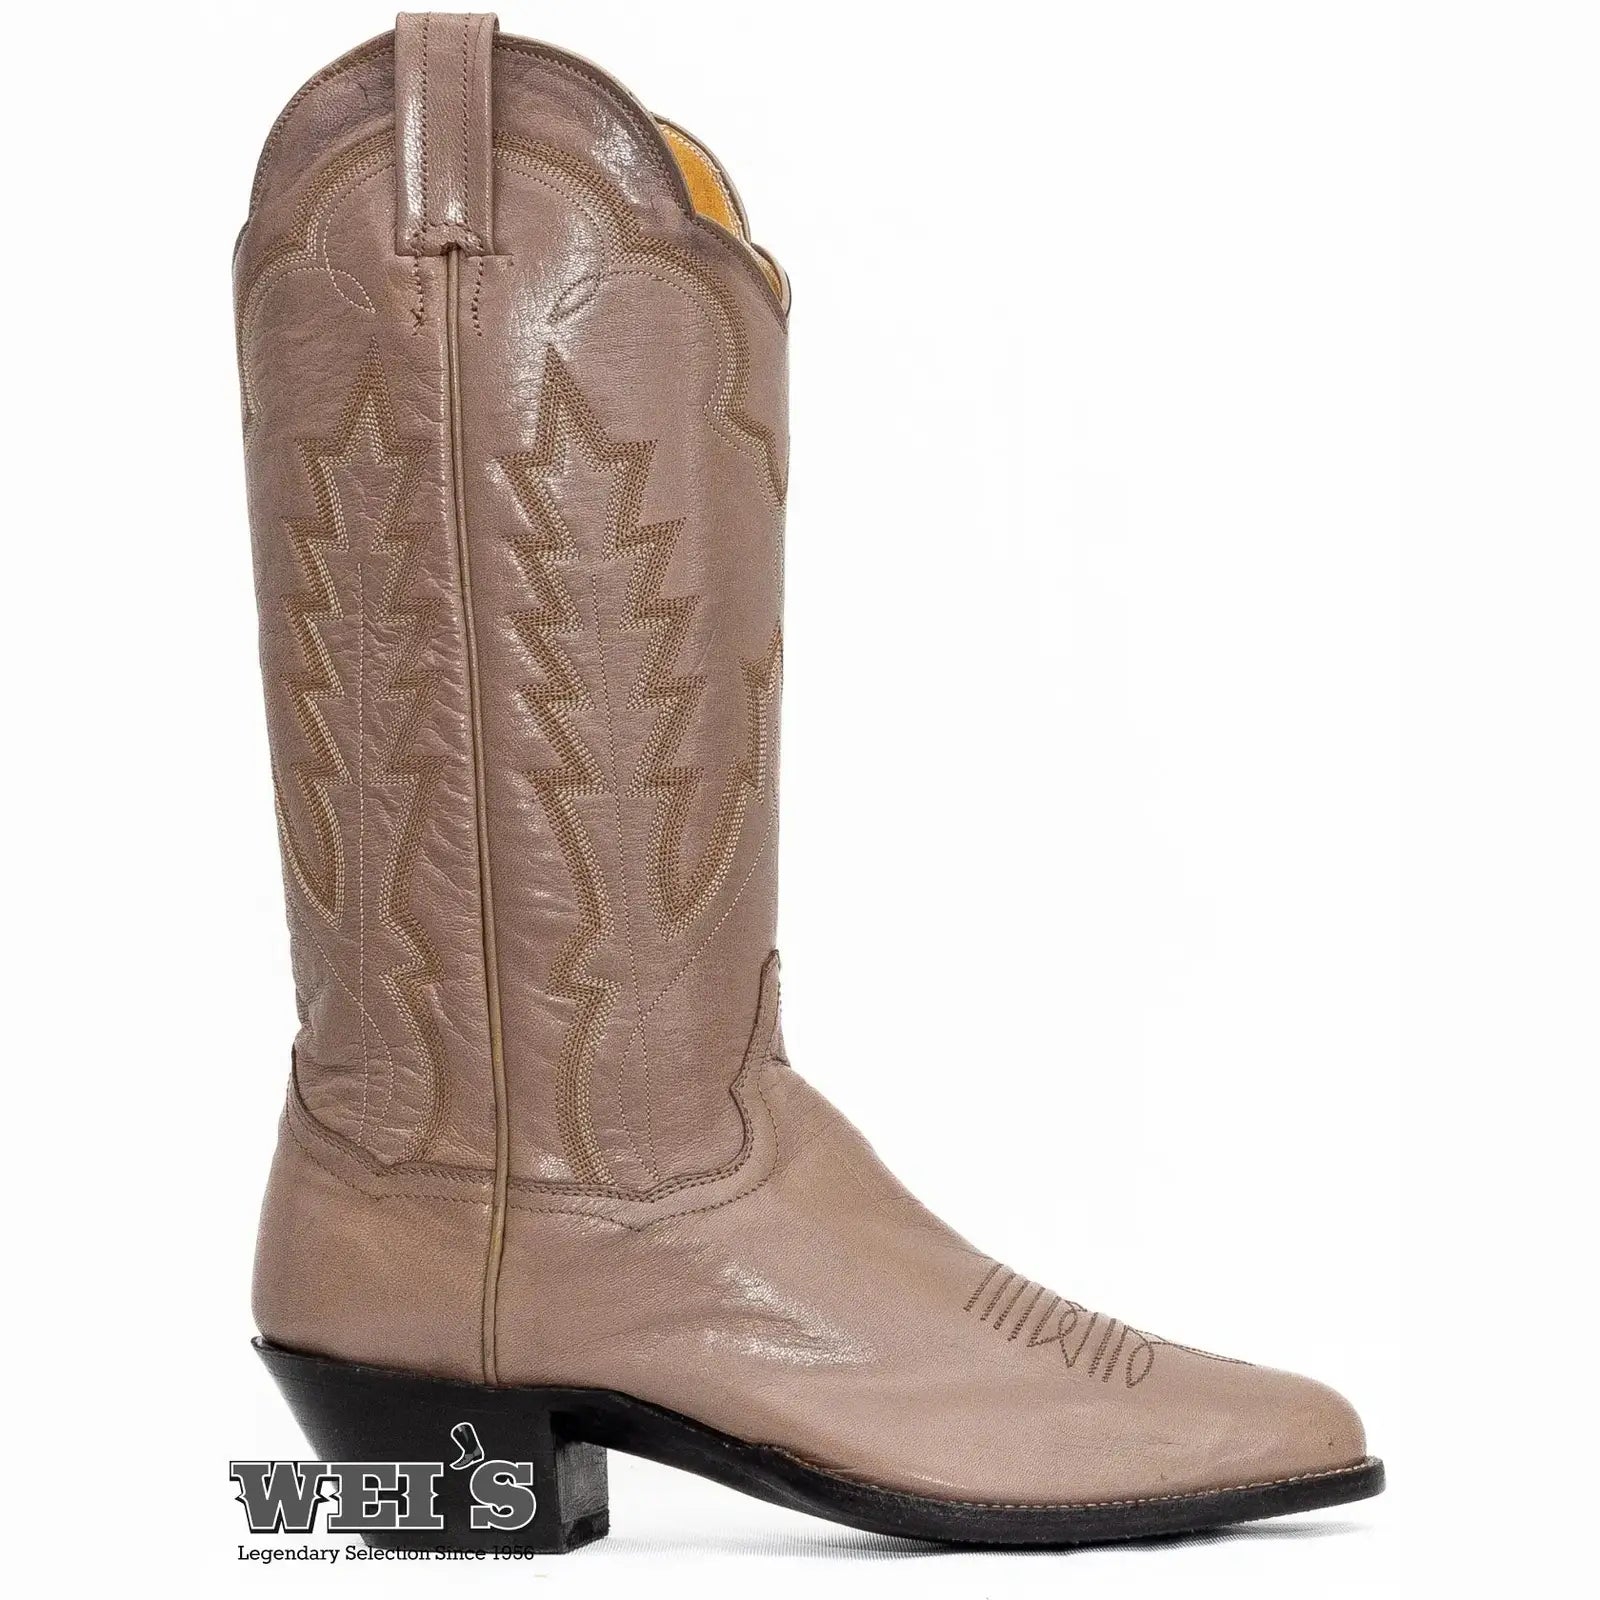 Panhandle Slim Women's Cowgirl Boots 13" Cowhide R-Toe W5551L - Panhandle Slim Boots